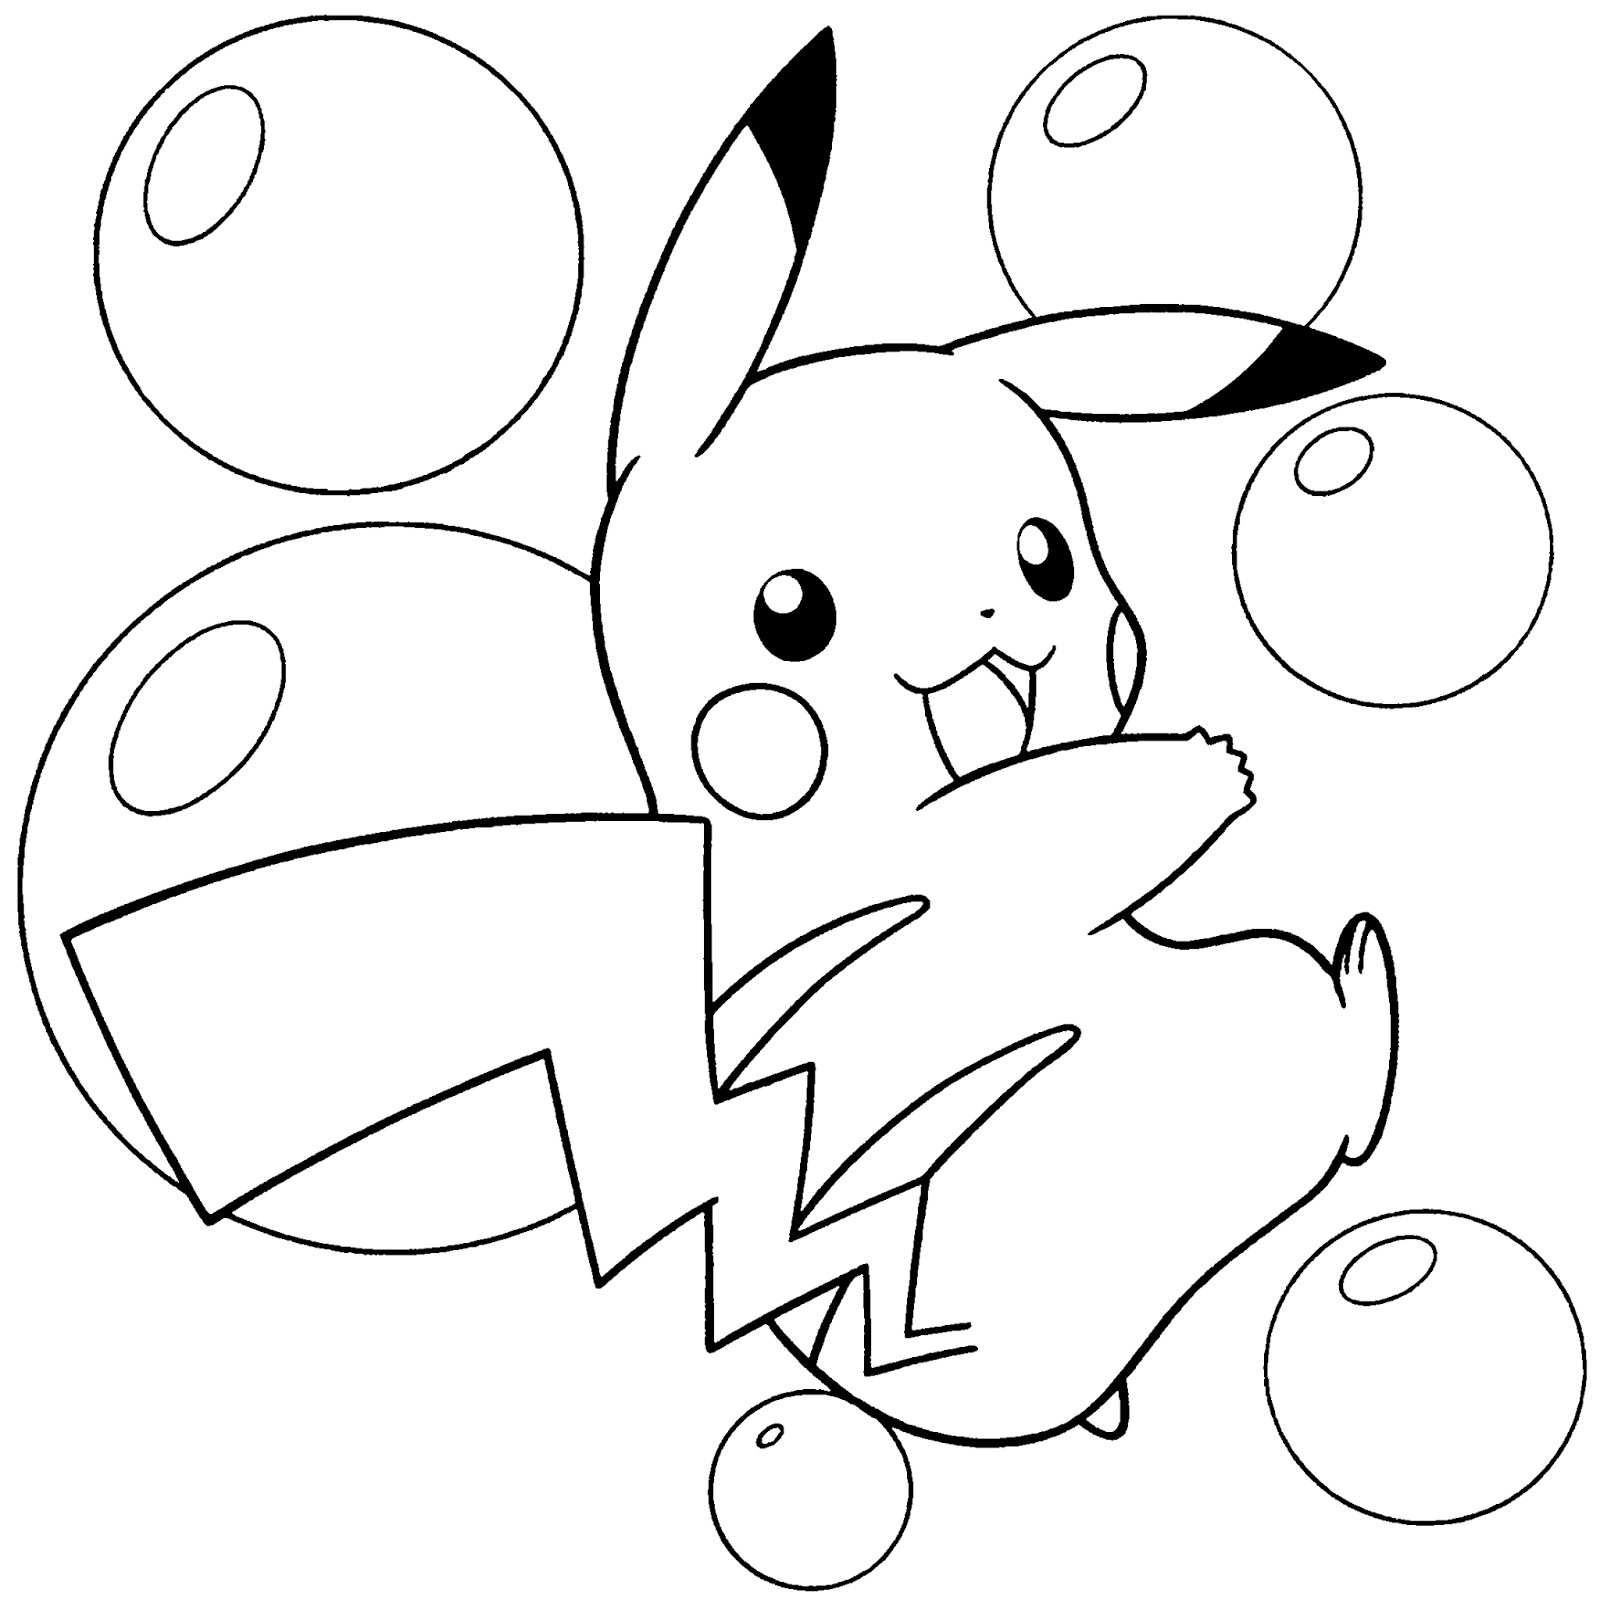 Kids Coloring Pages Pokemon
 Pokemon Coloring Pages for Kids